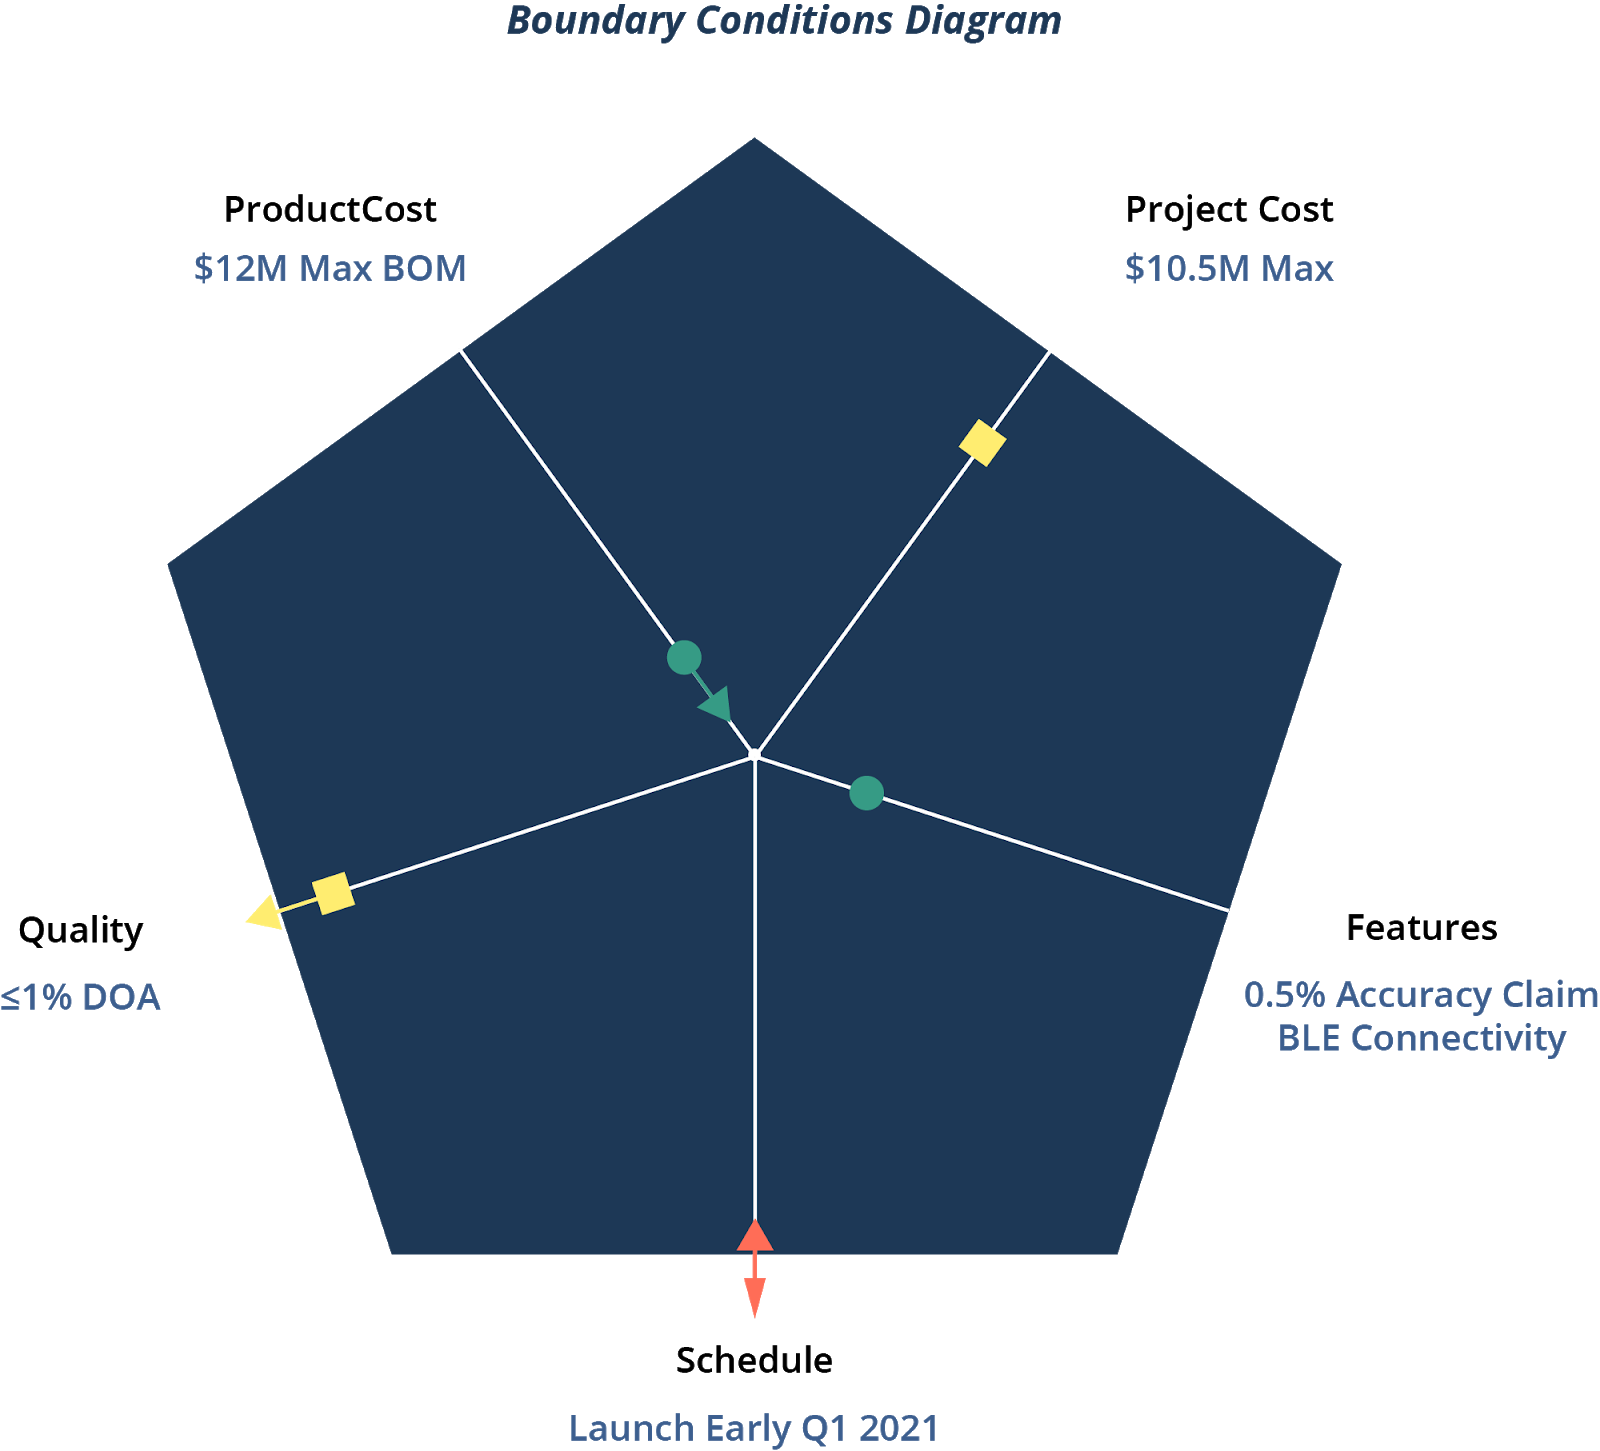 Software product development boundary conditions diagram